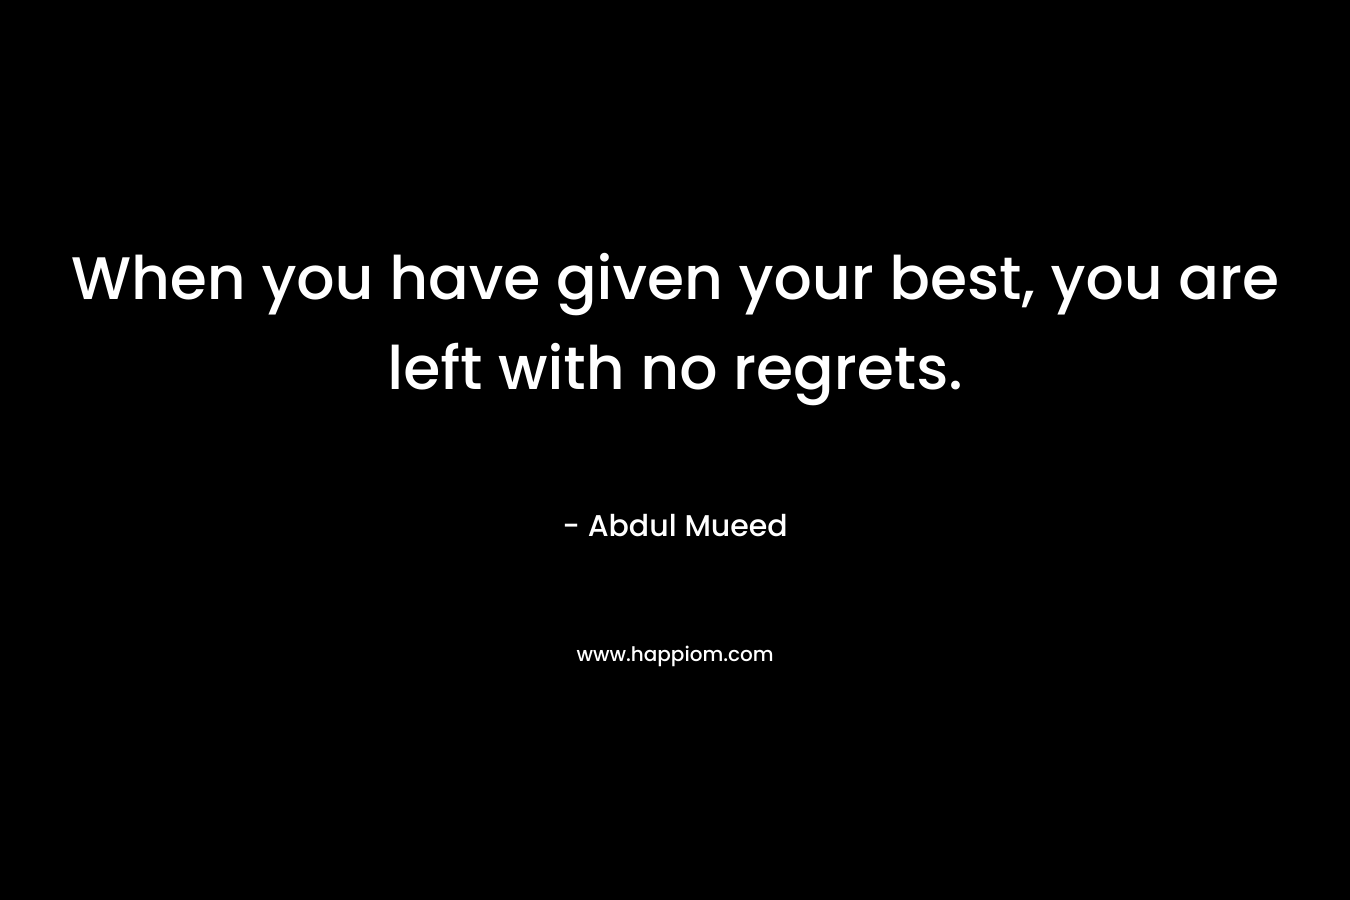 When you have given your best, you are left with no regrets.